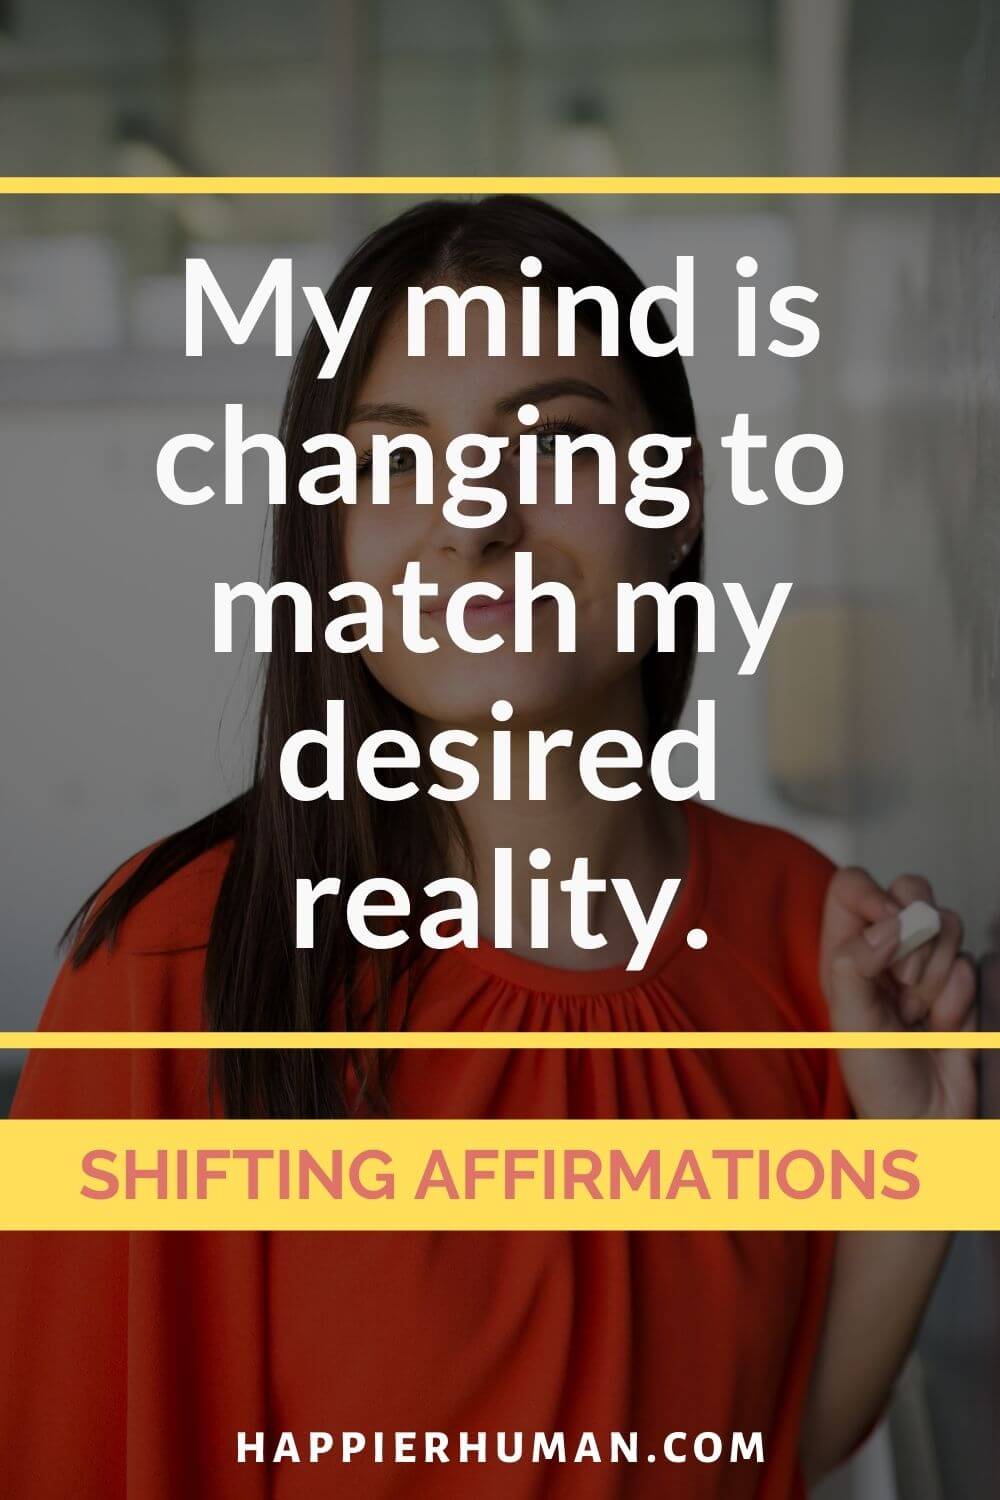 Shifting Affirmations - My mind is changing to match my desired reality. | shifting affirmations reddit | shifting affirmations haikyuu | shifting affirmations aot